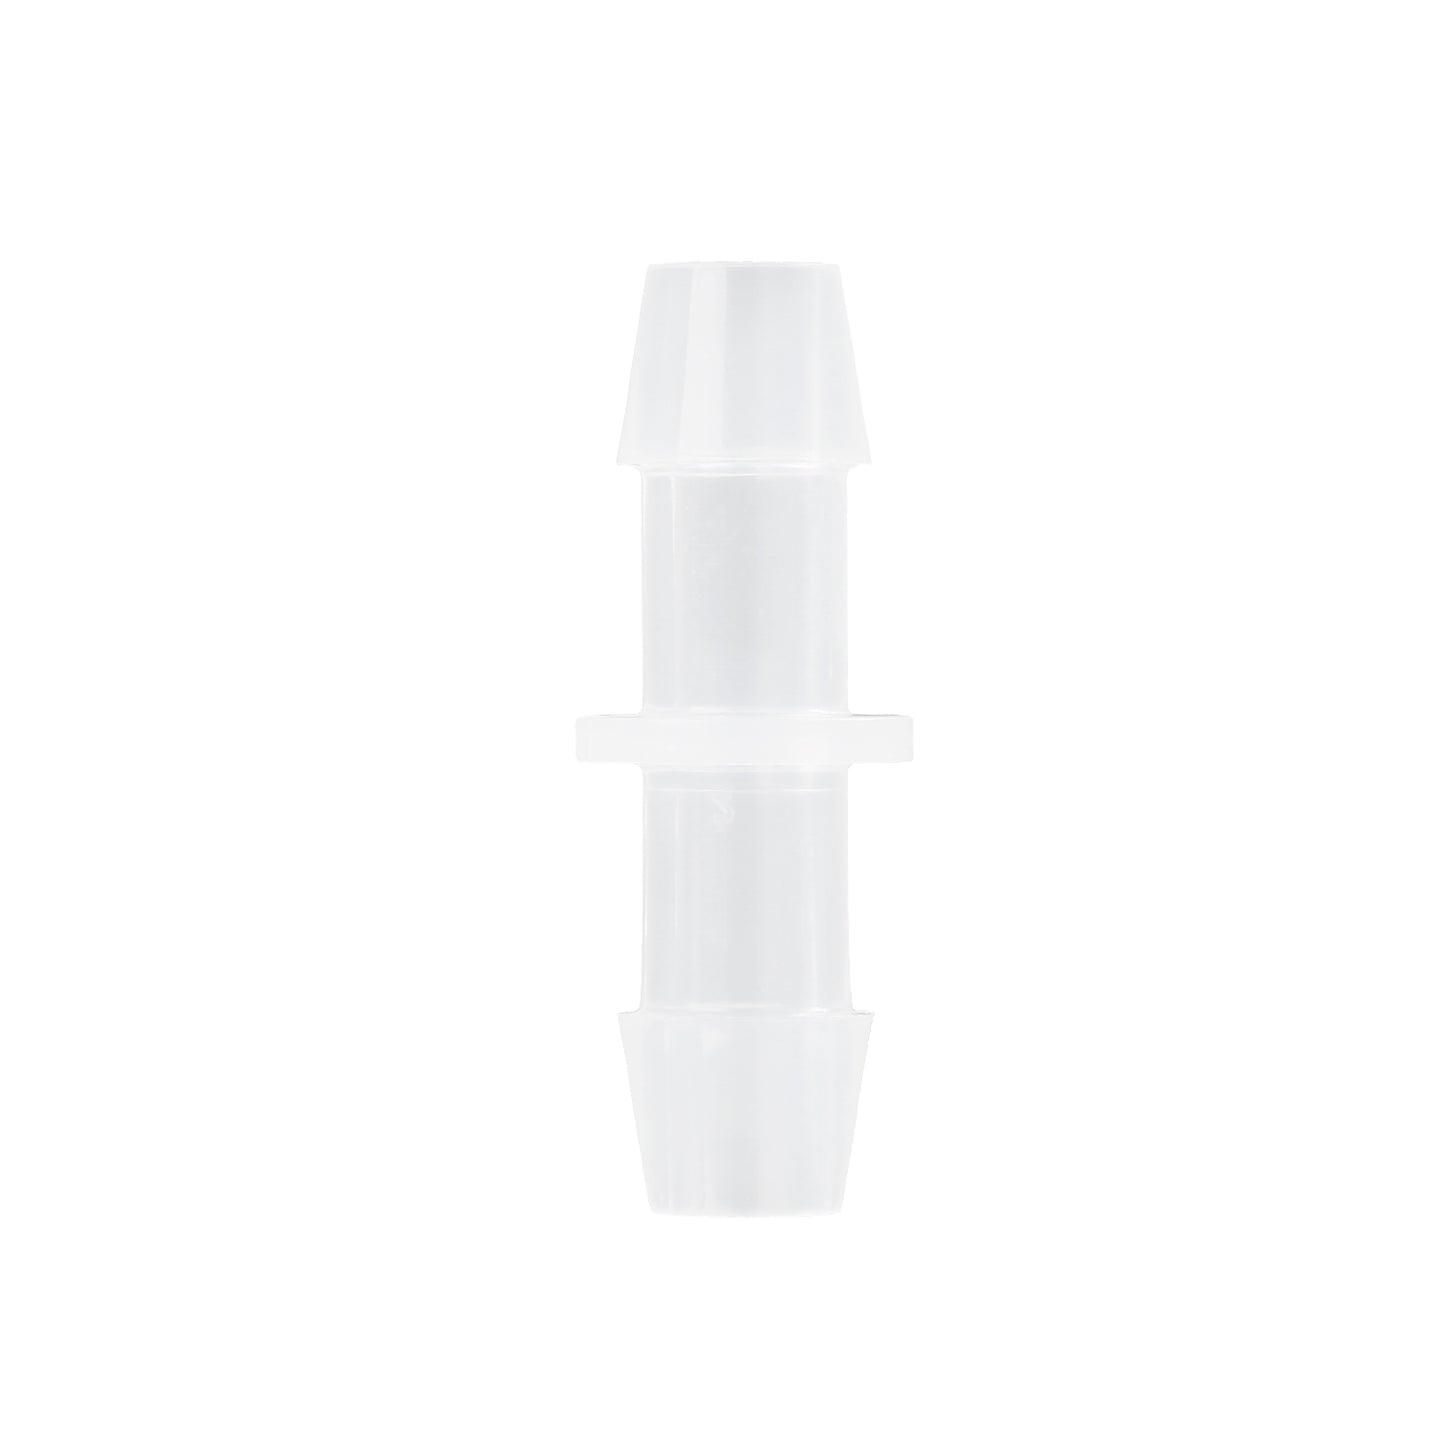 COBETTER Straight Hose Barb Fittings Equal Barbed Pharmaceutical Polypropylene Through Tube Fitting Connector 10/pk